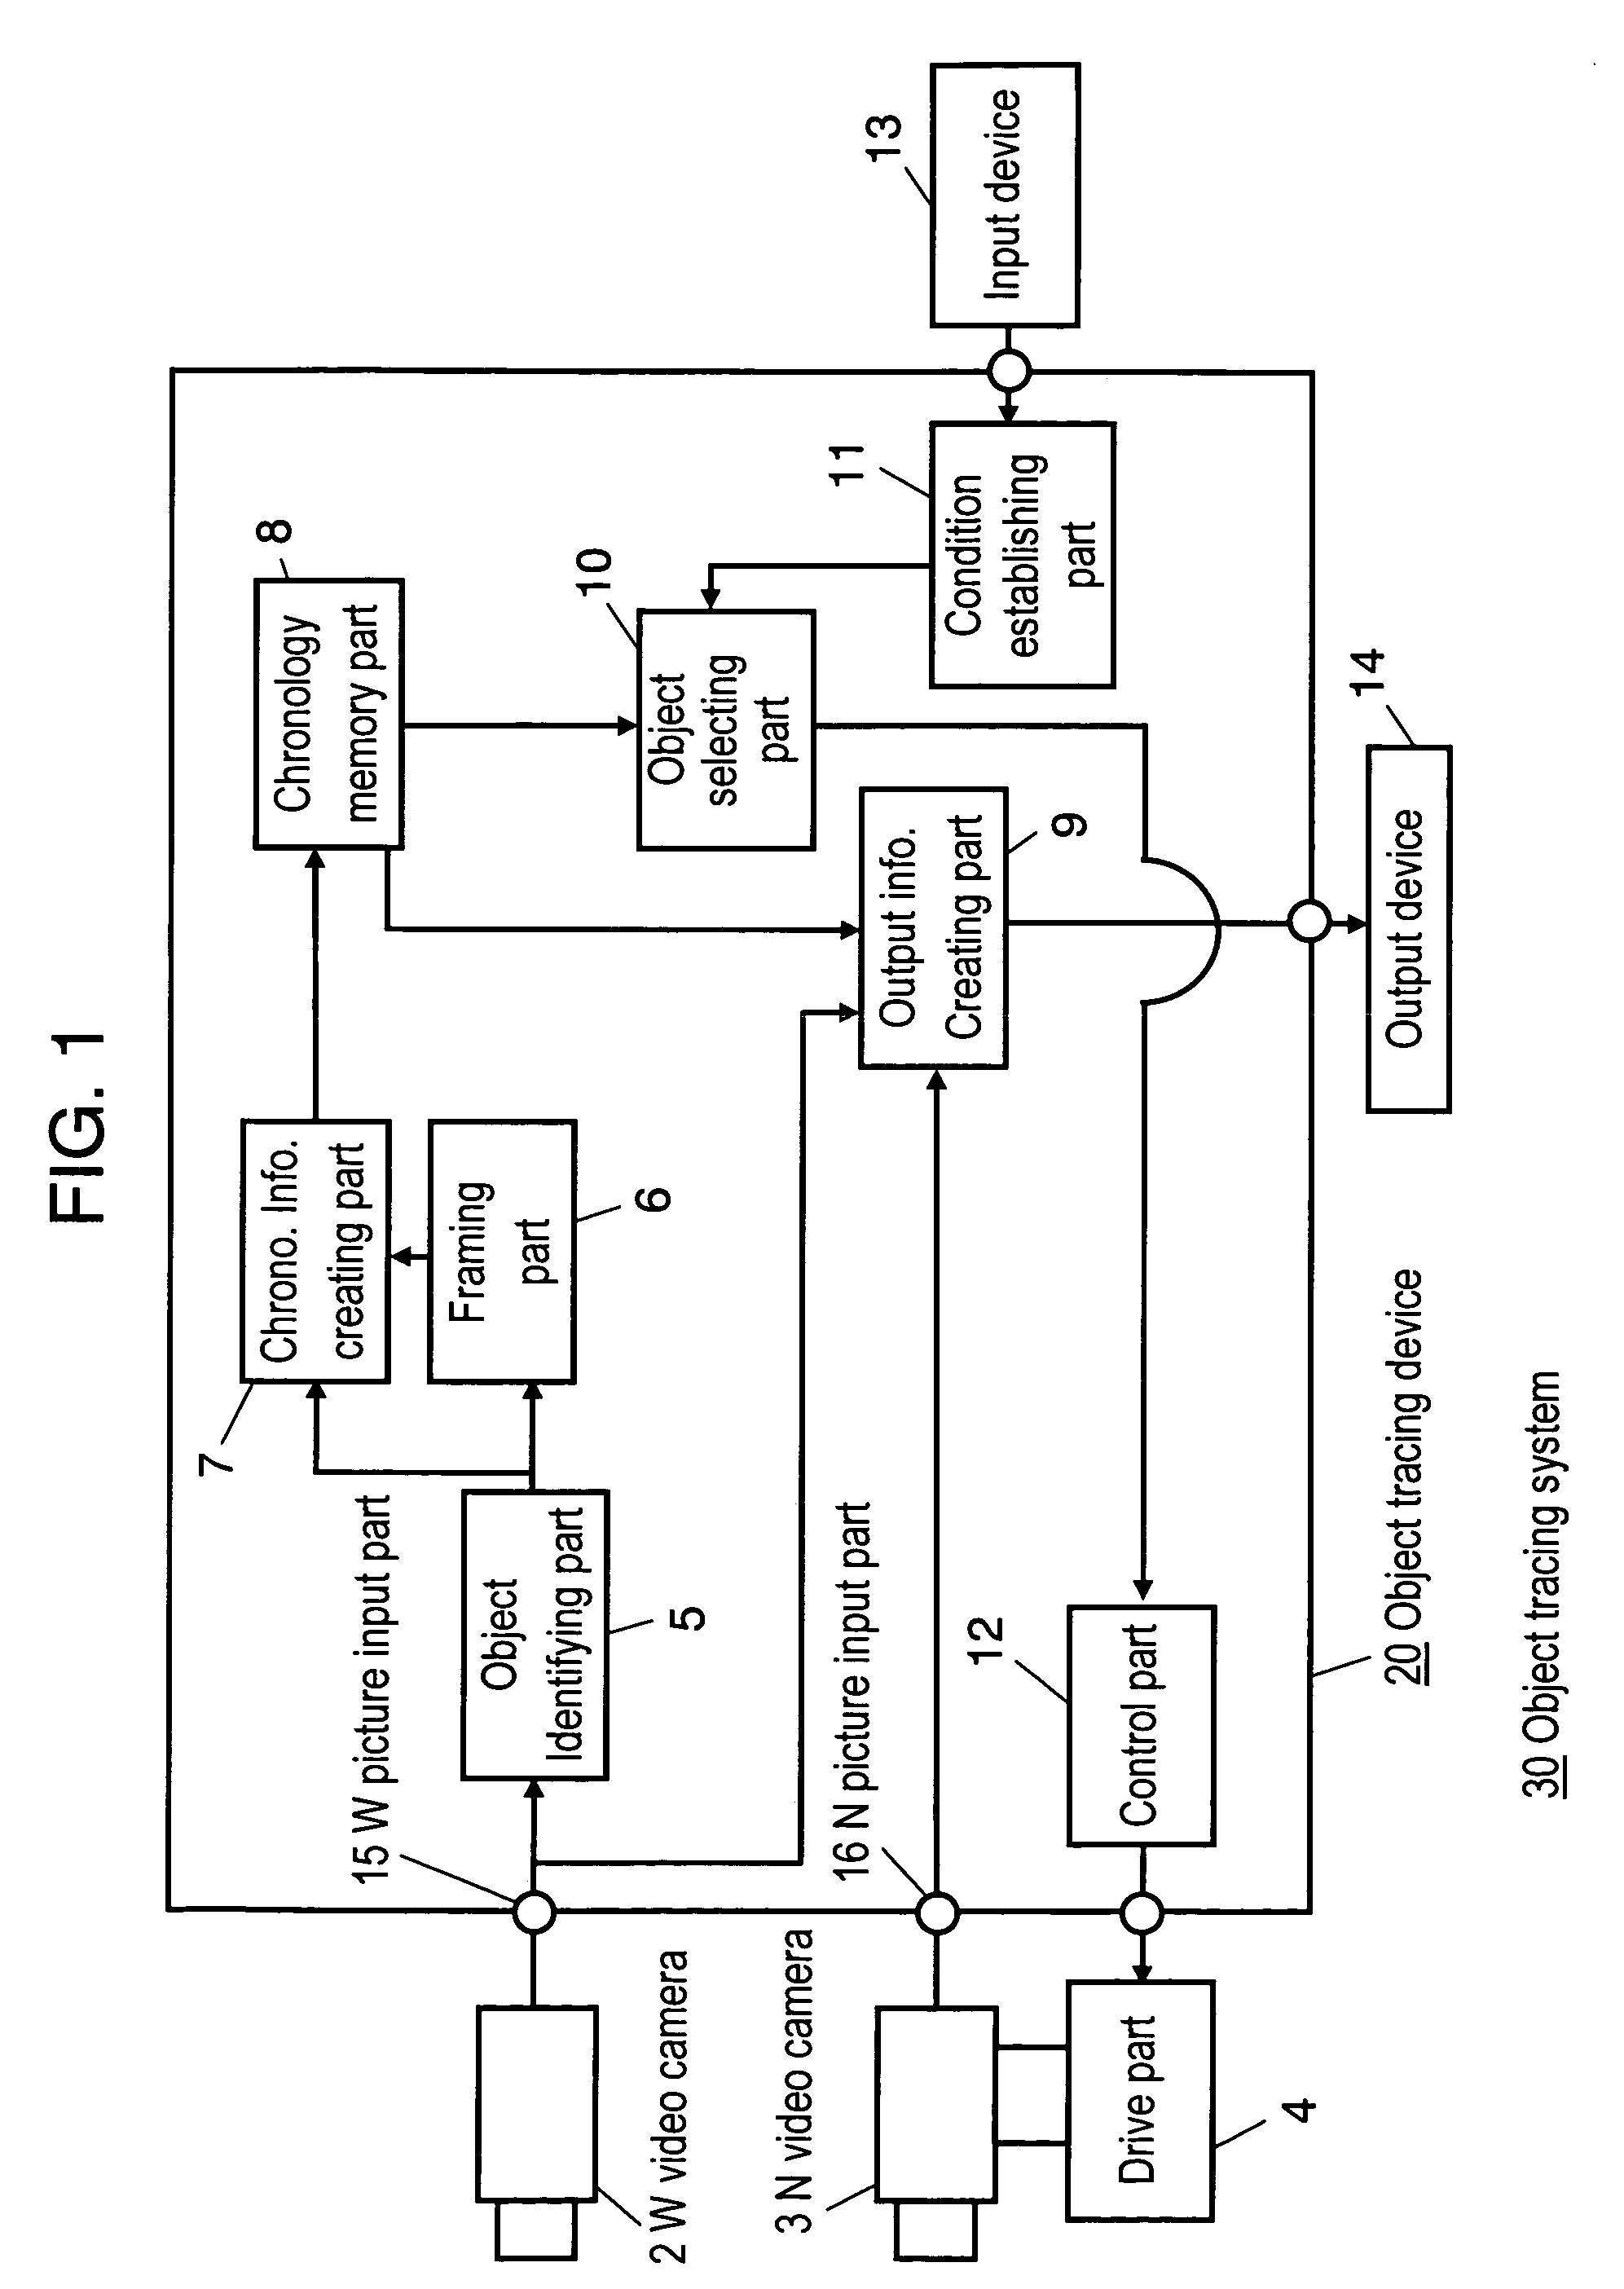 Object tracing device, object tracing system, and object tracing method